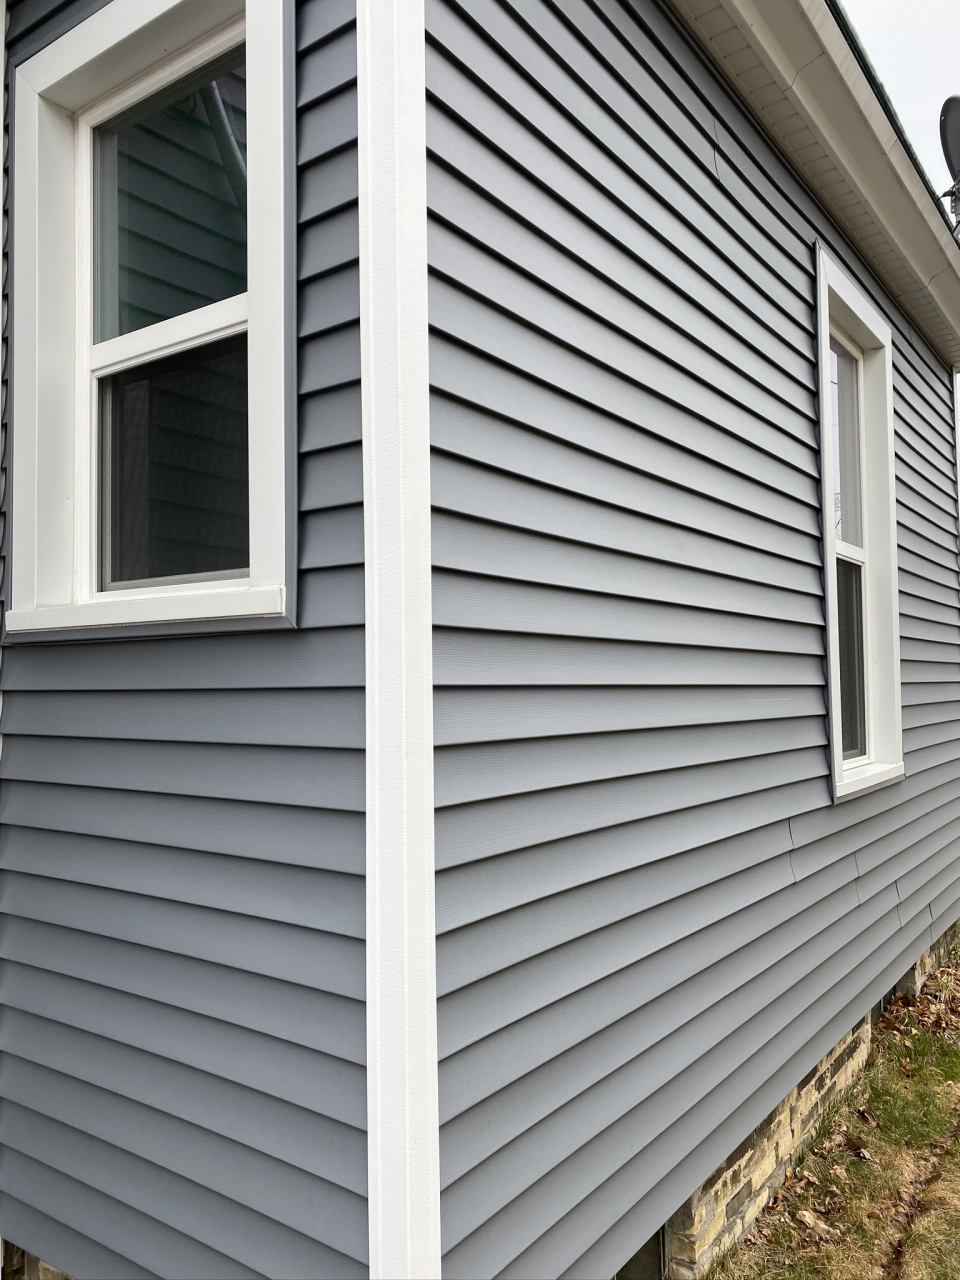 Need Siding Replacement? Call The Liftime Home Experts Today.